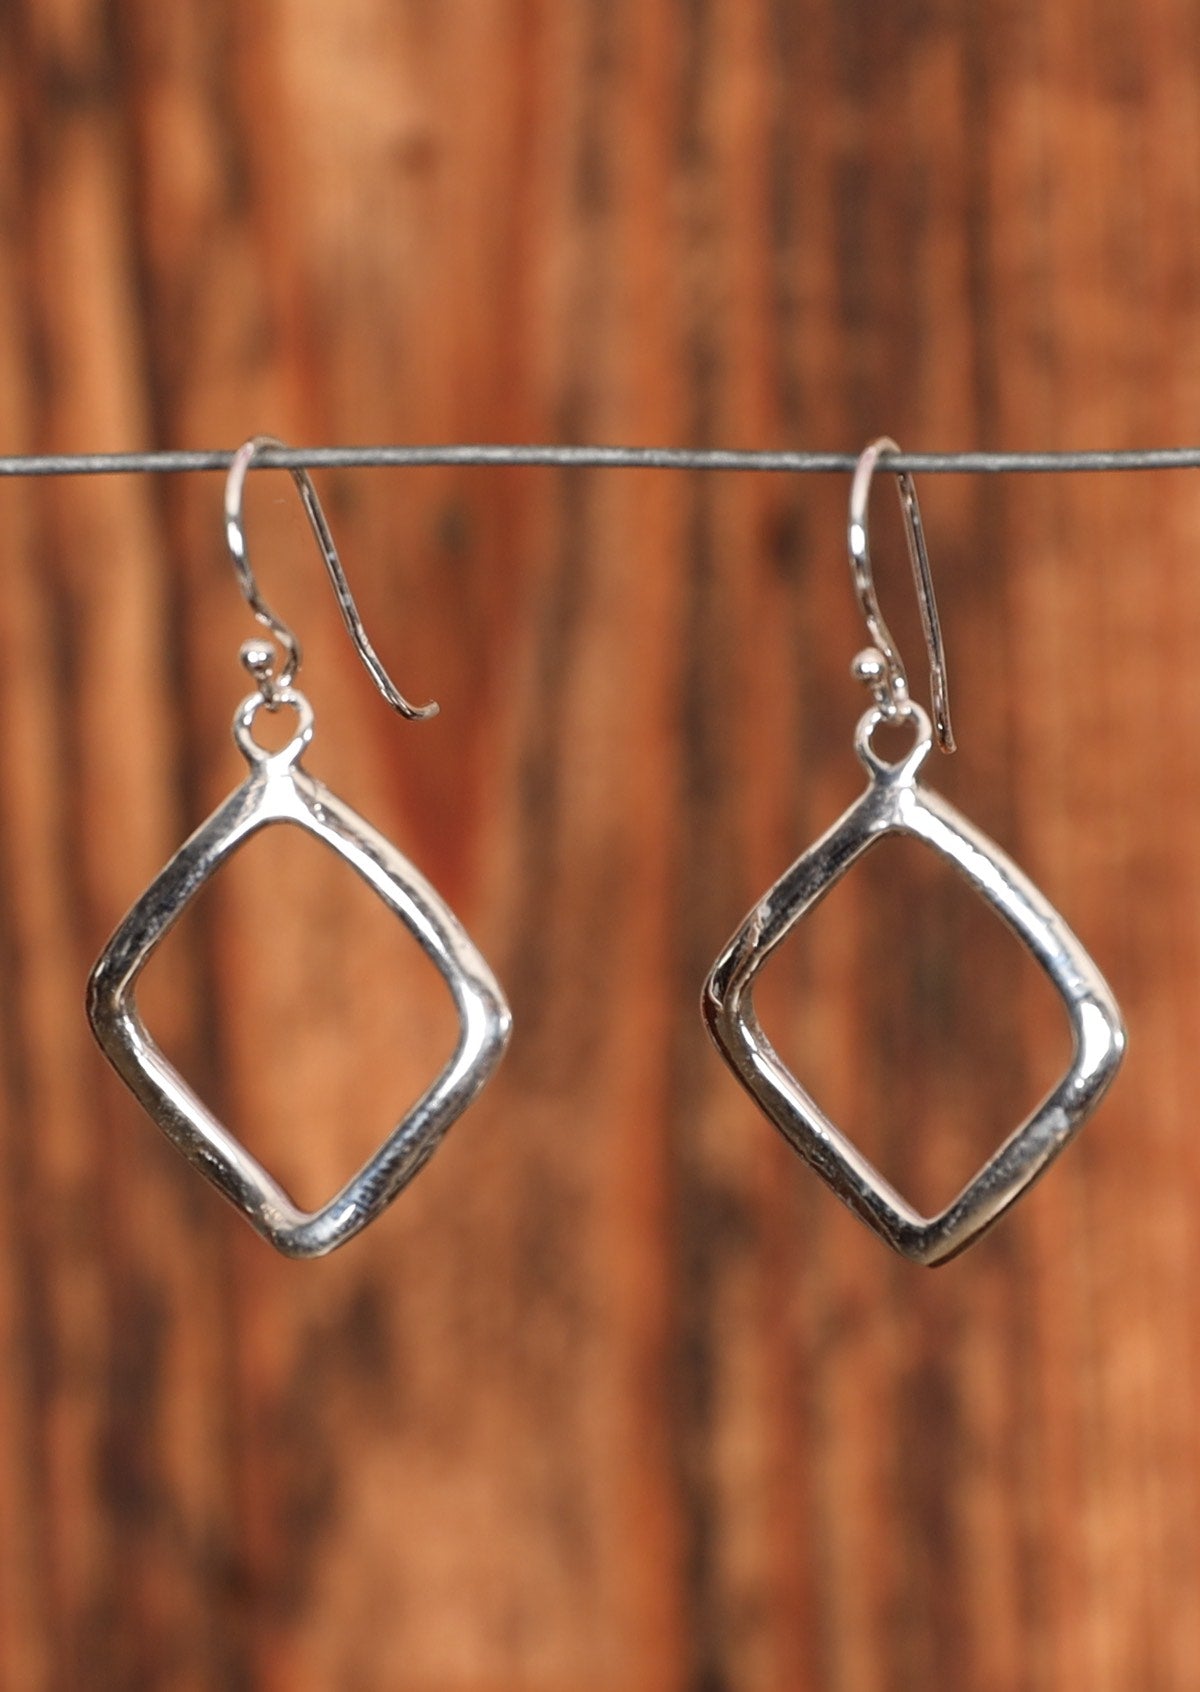 92.5% silver dangly diamond earrings sitting on wire for display.